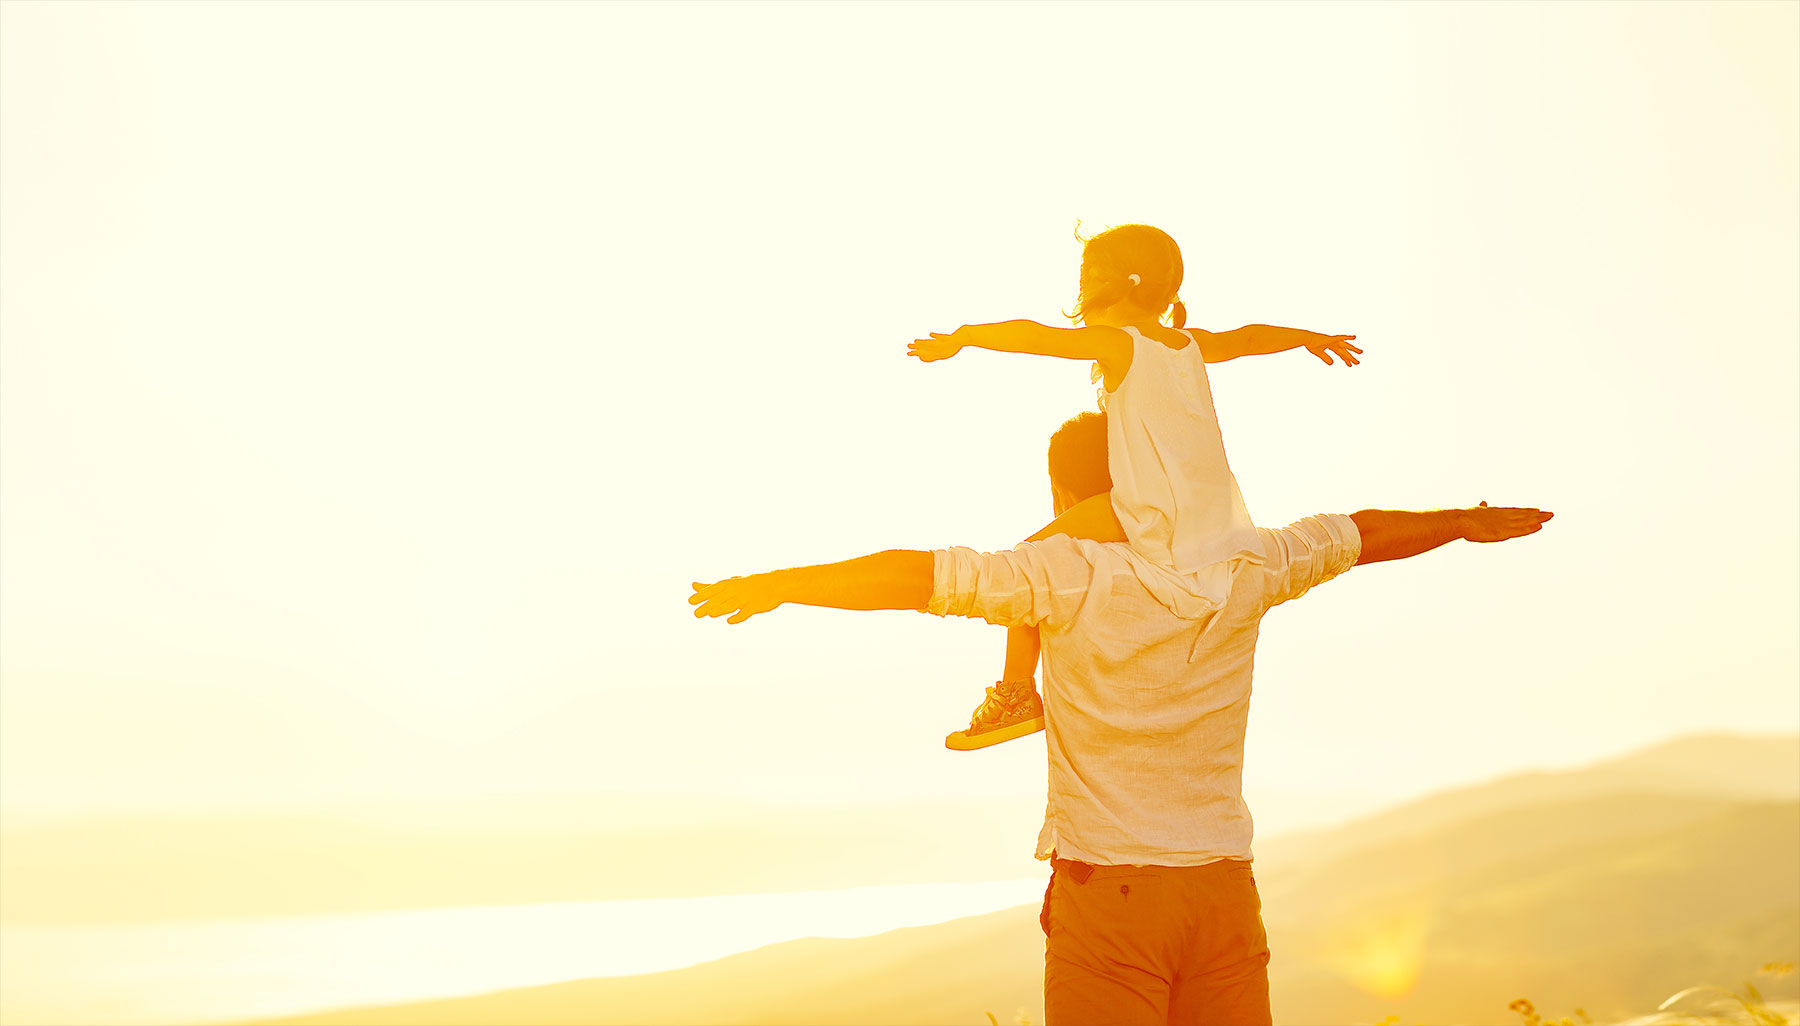 Dad with daughter on shoulders, making airplane wings with arms outstretched